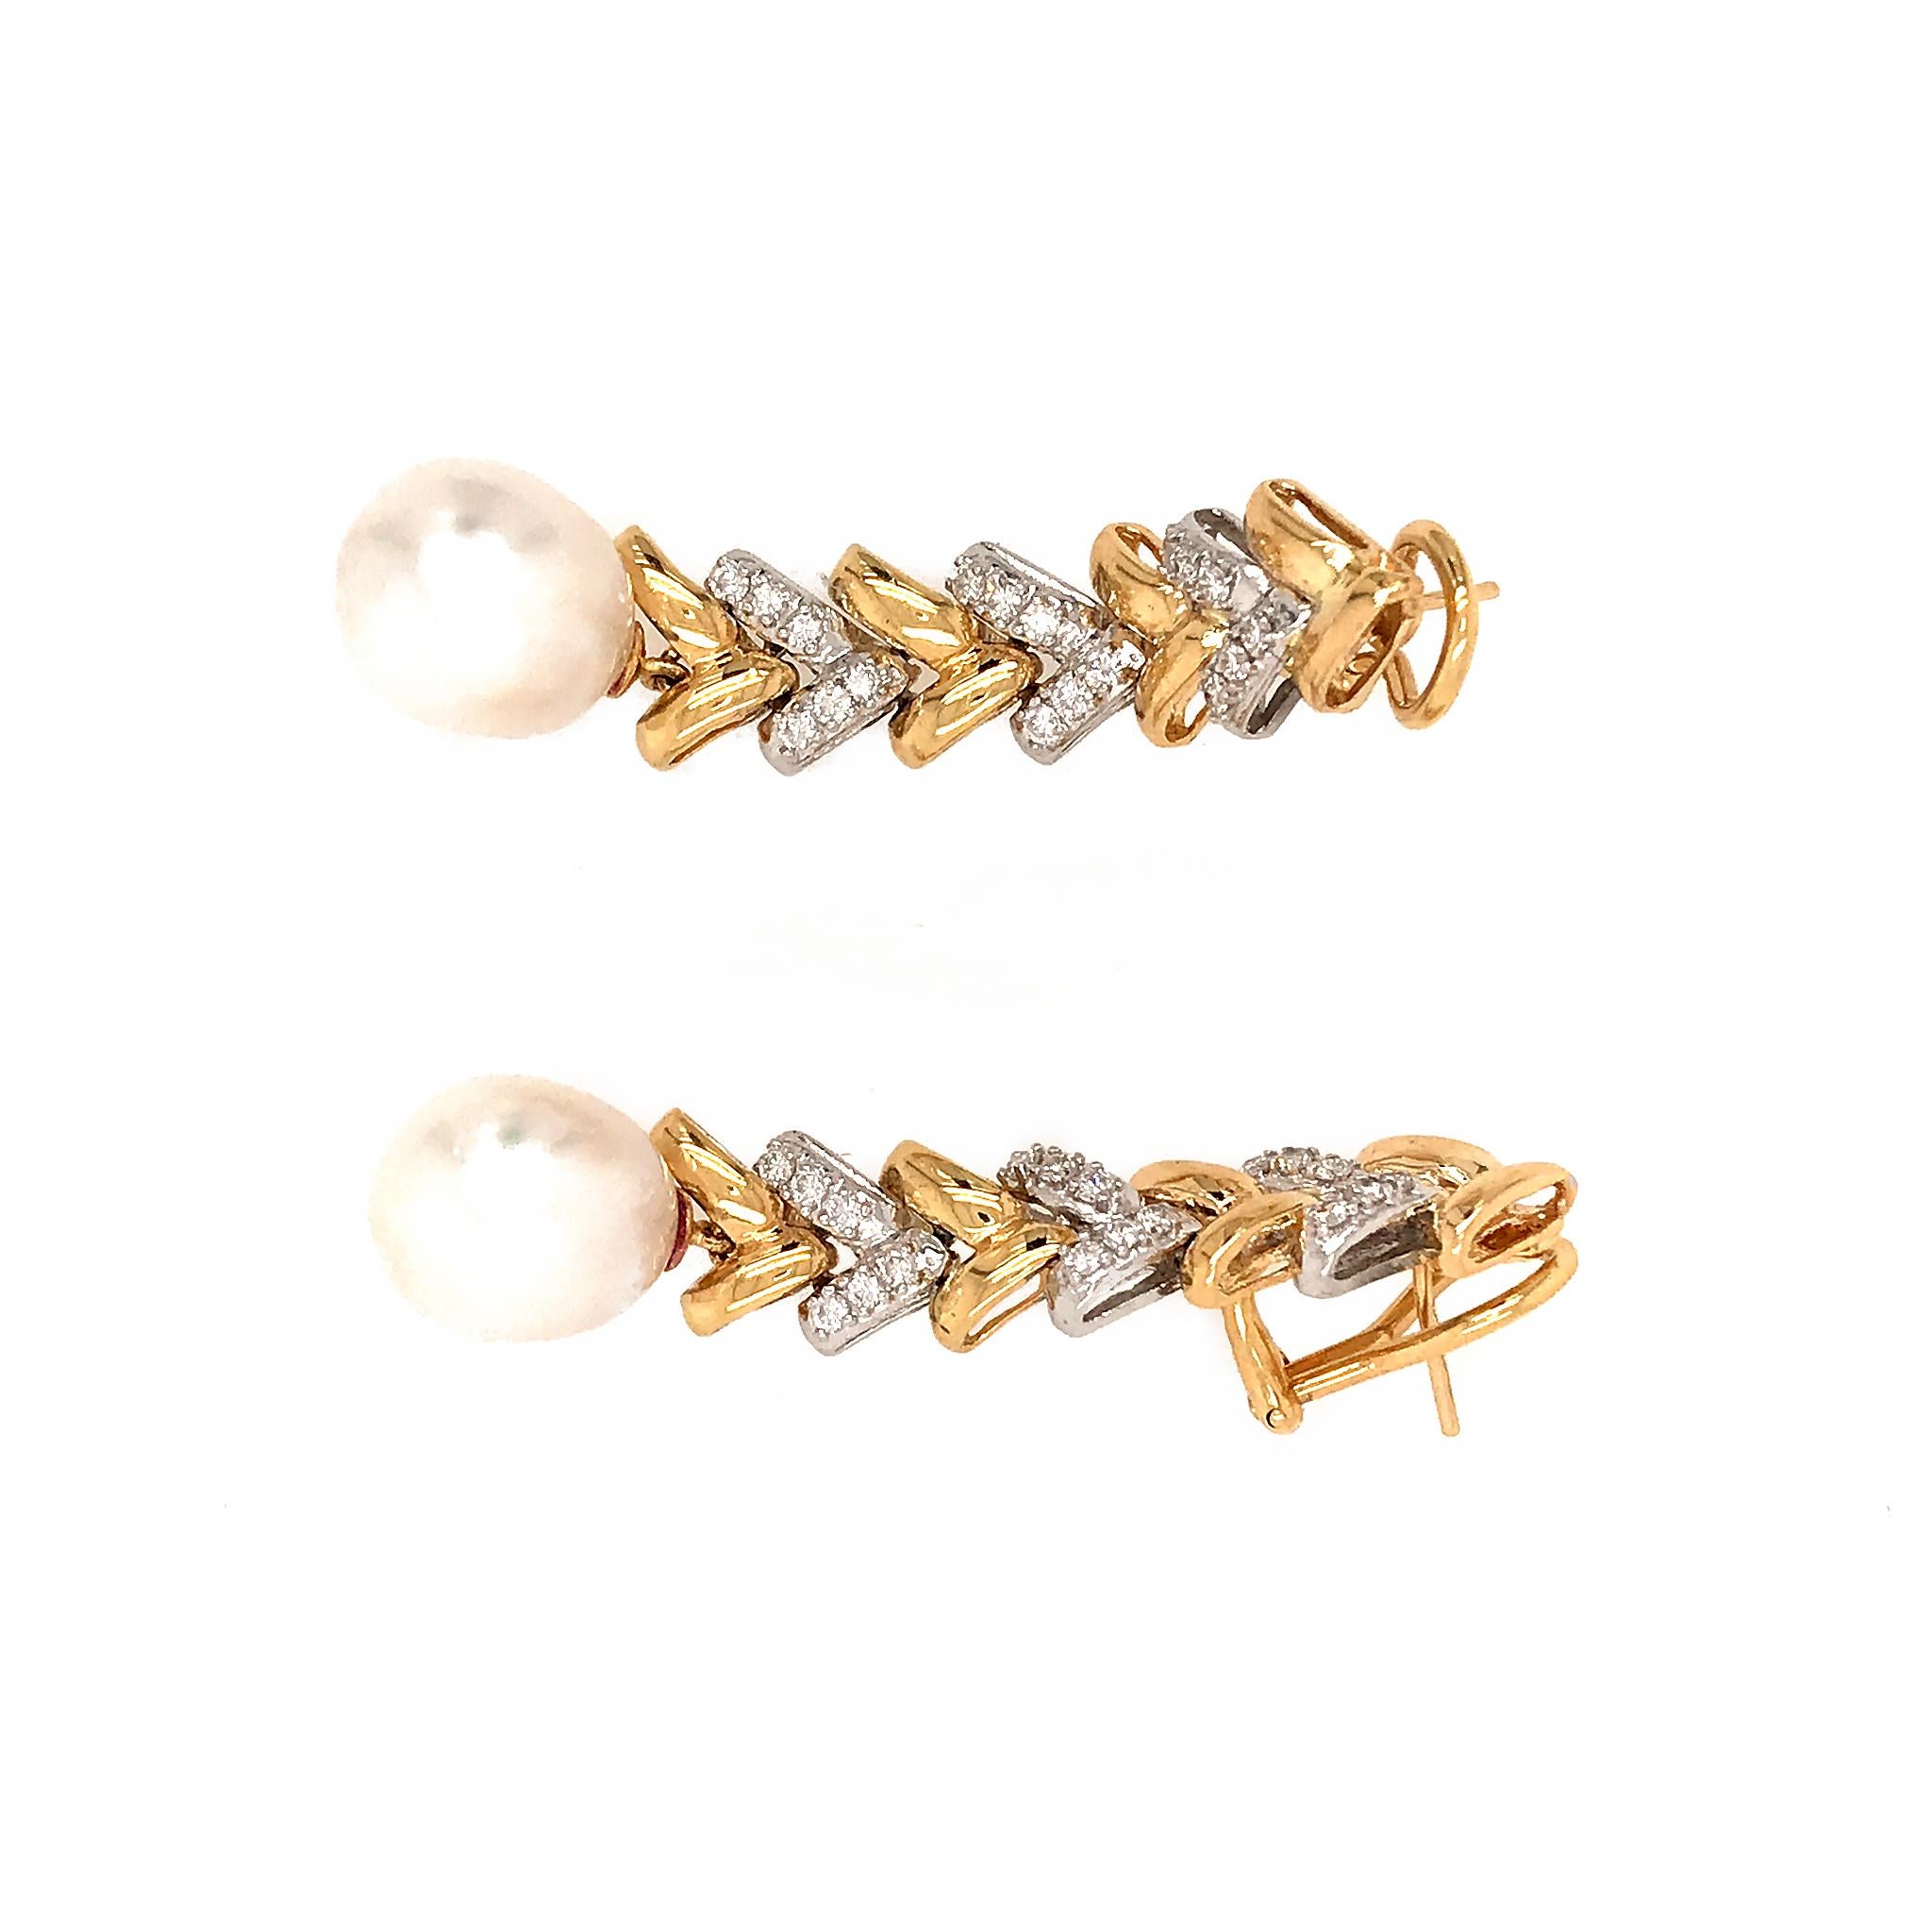 18k Yellow Gold
Total Weight: 16.4 grams
Pearl = 11 mm
Diamond = 0.72 ct twd (estimated)
Length: 2 inches